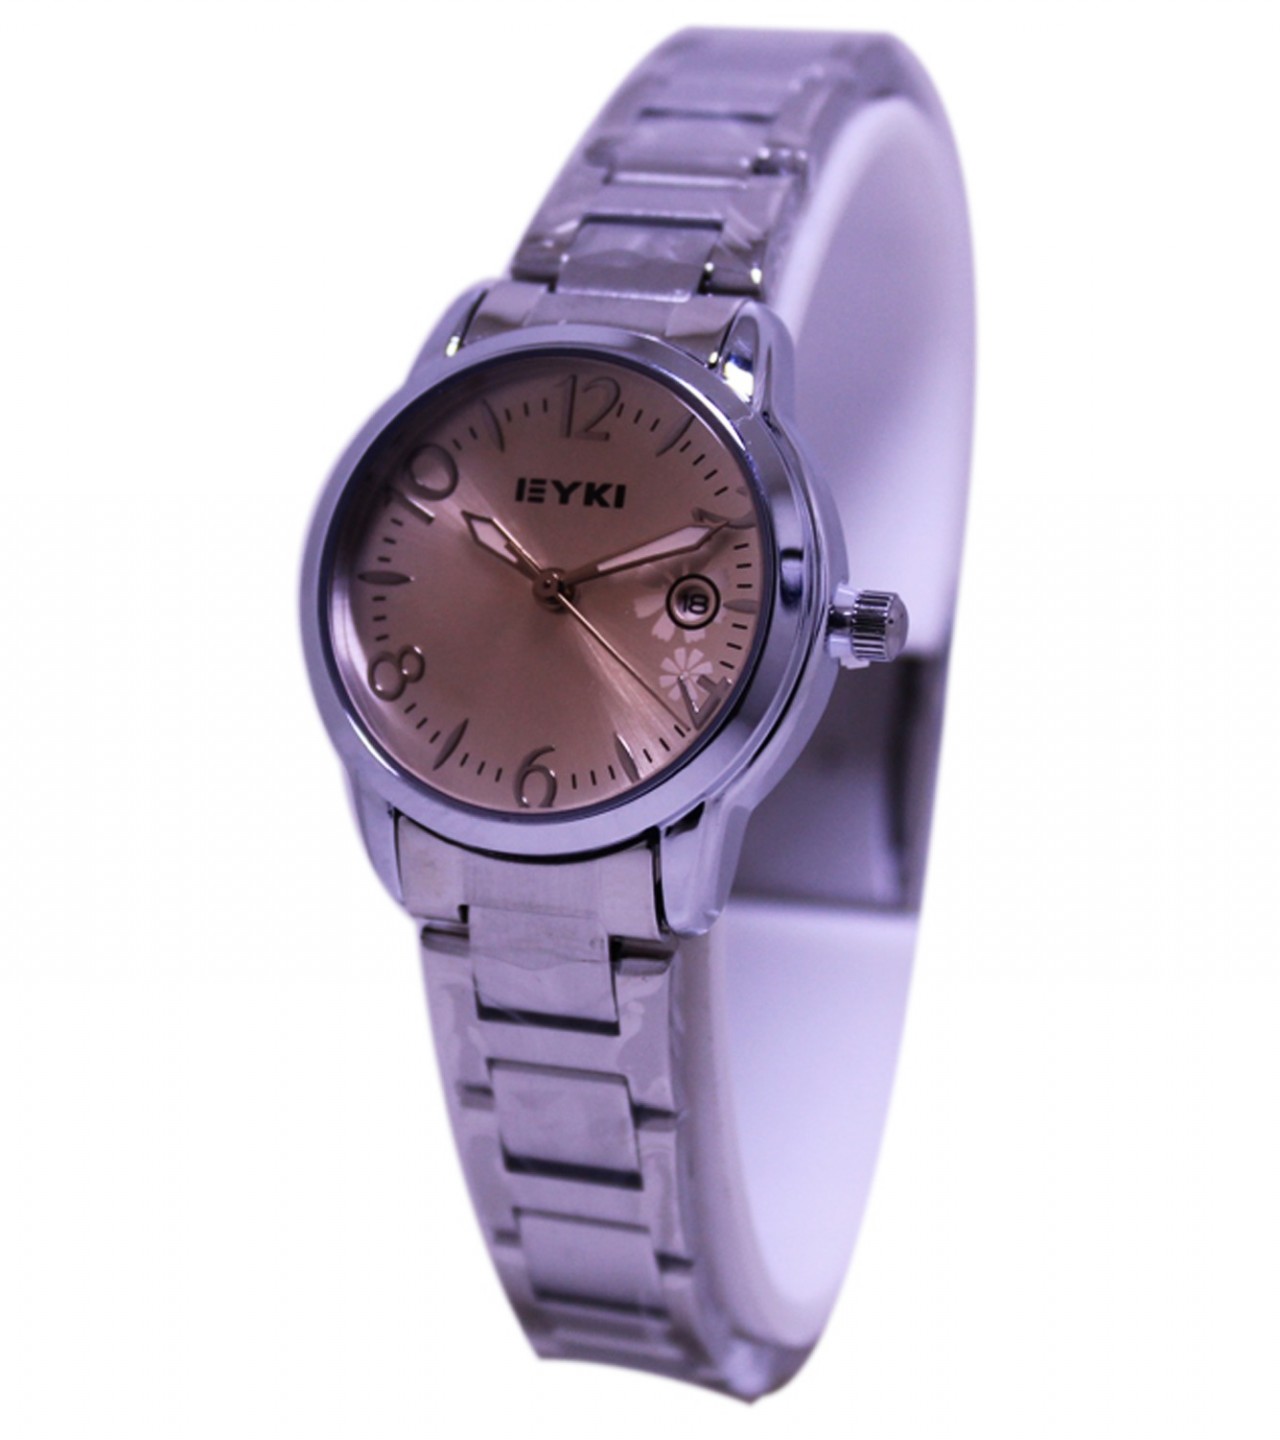 EYKI Stainless Steel Analog Watch for Women with Date - Silver